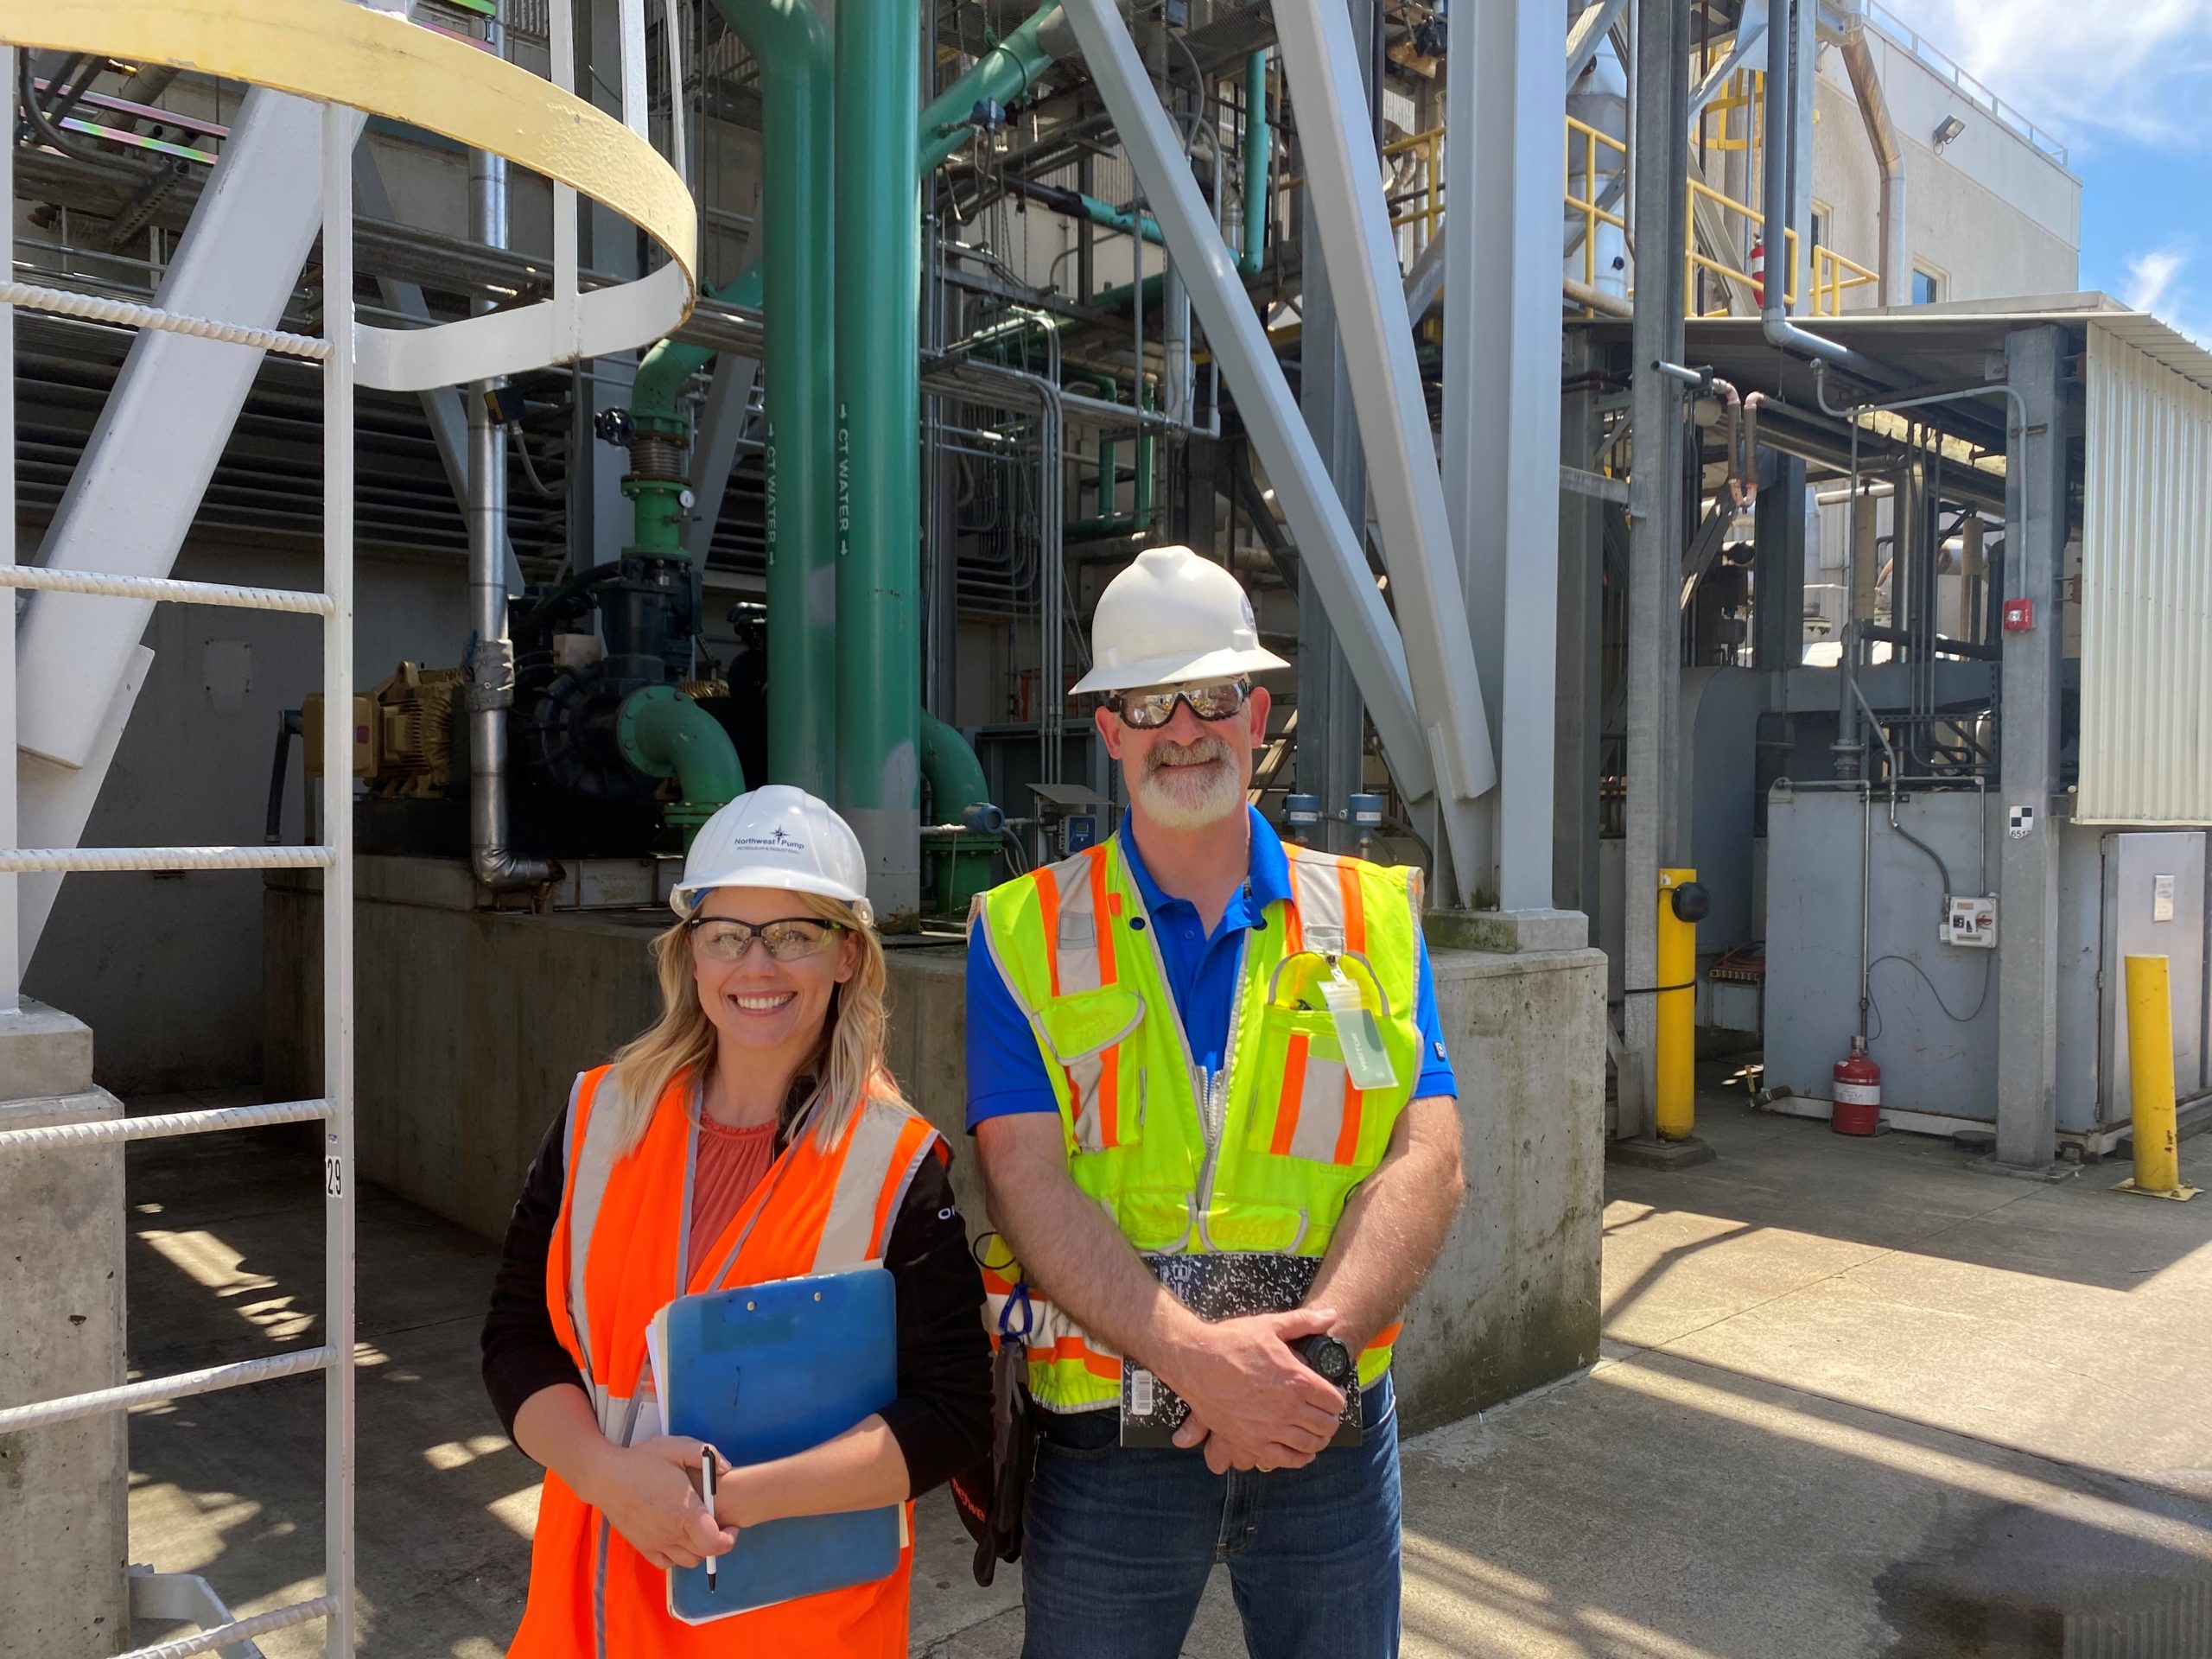 Northwest Pump employees Brianna and Jack on-site